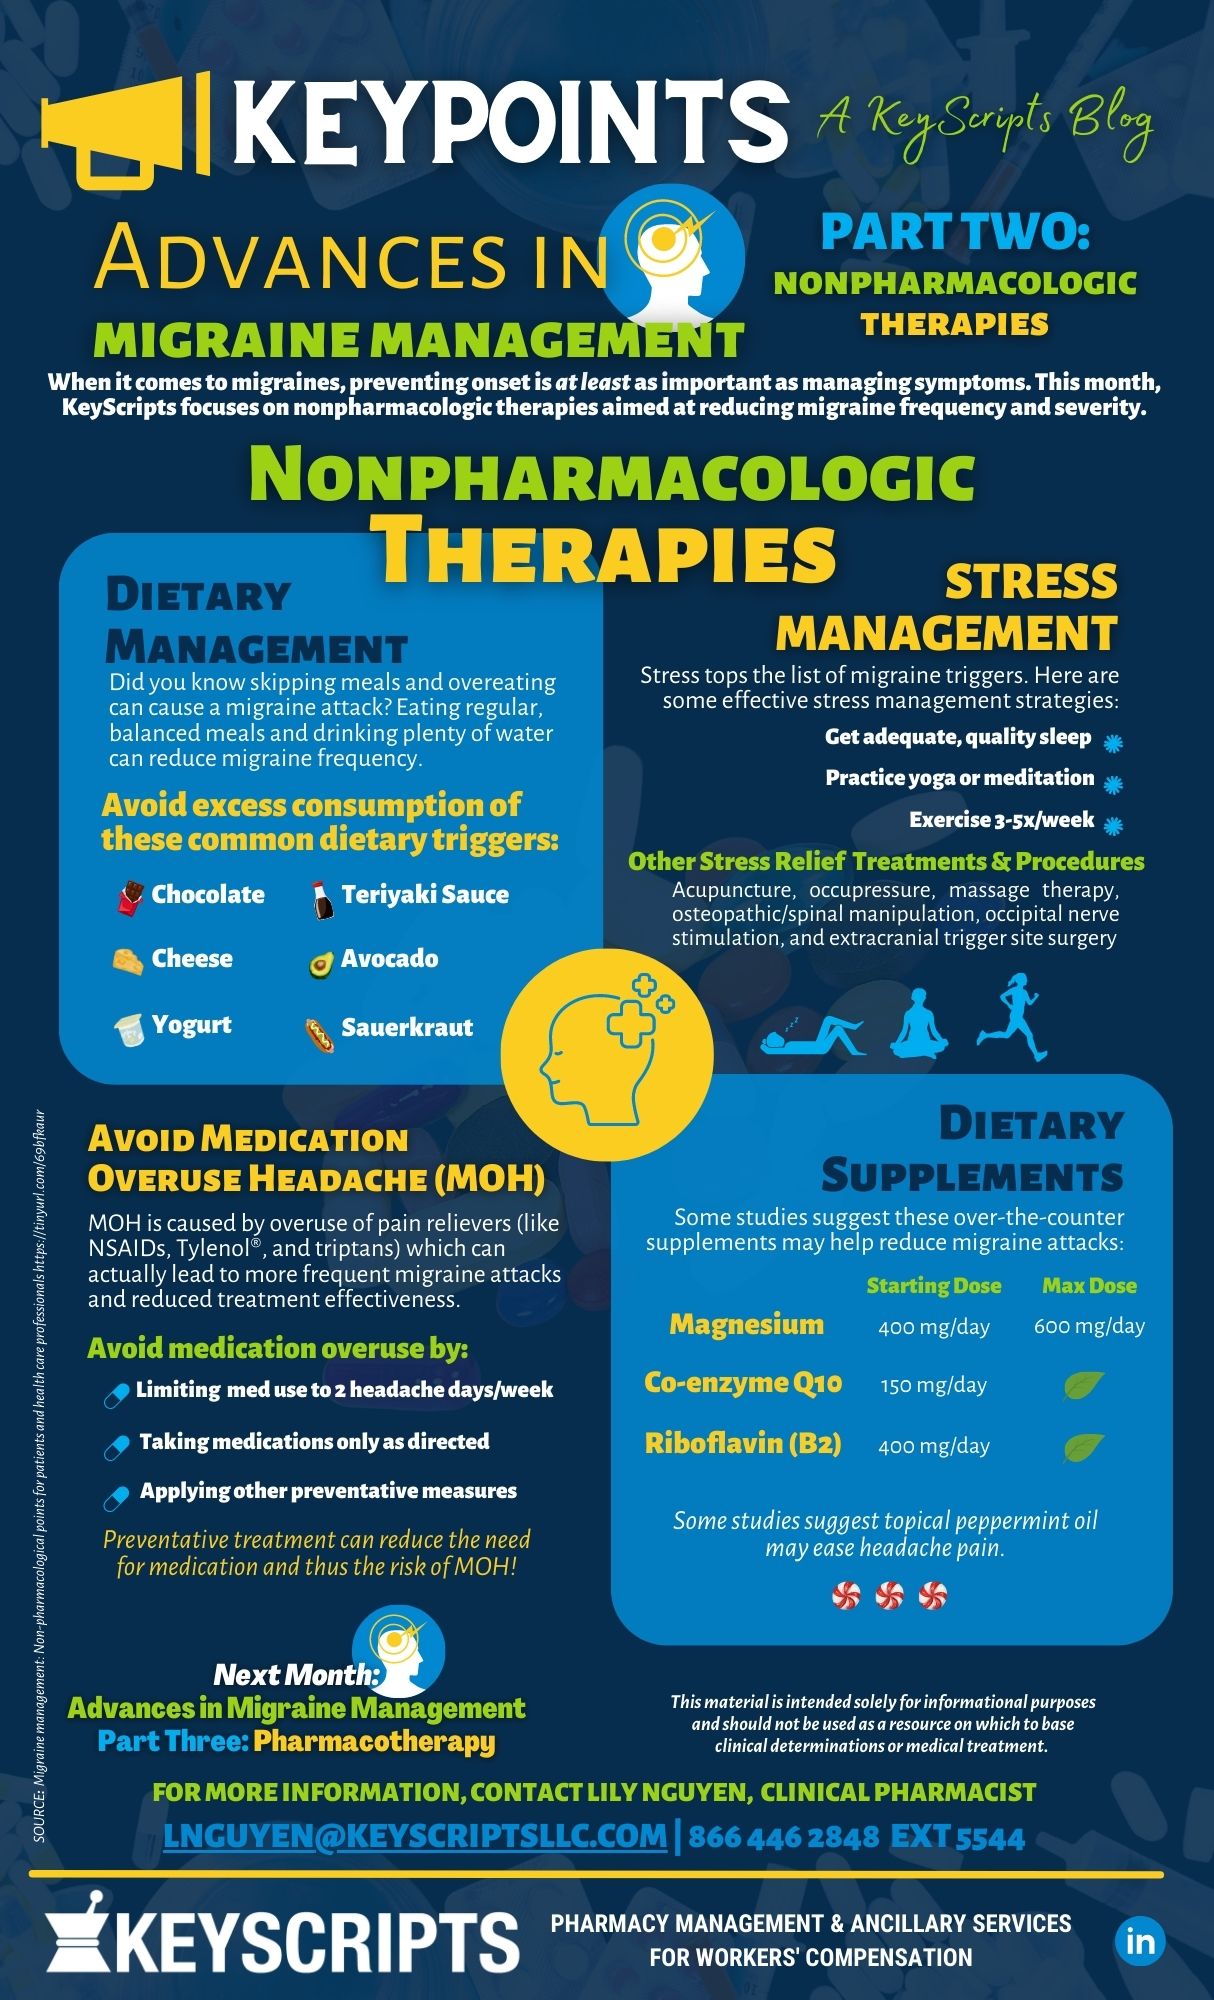 Migraine Management – Part Two: Nonpharmacologic Therapies